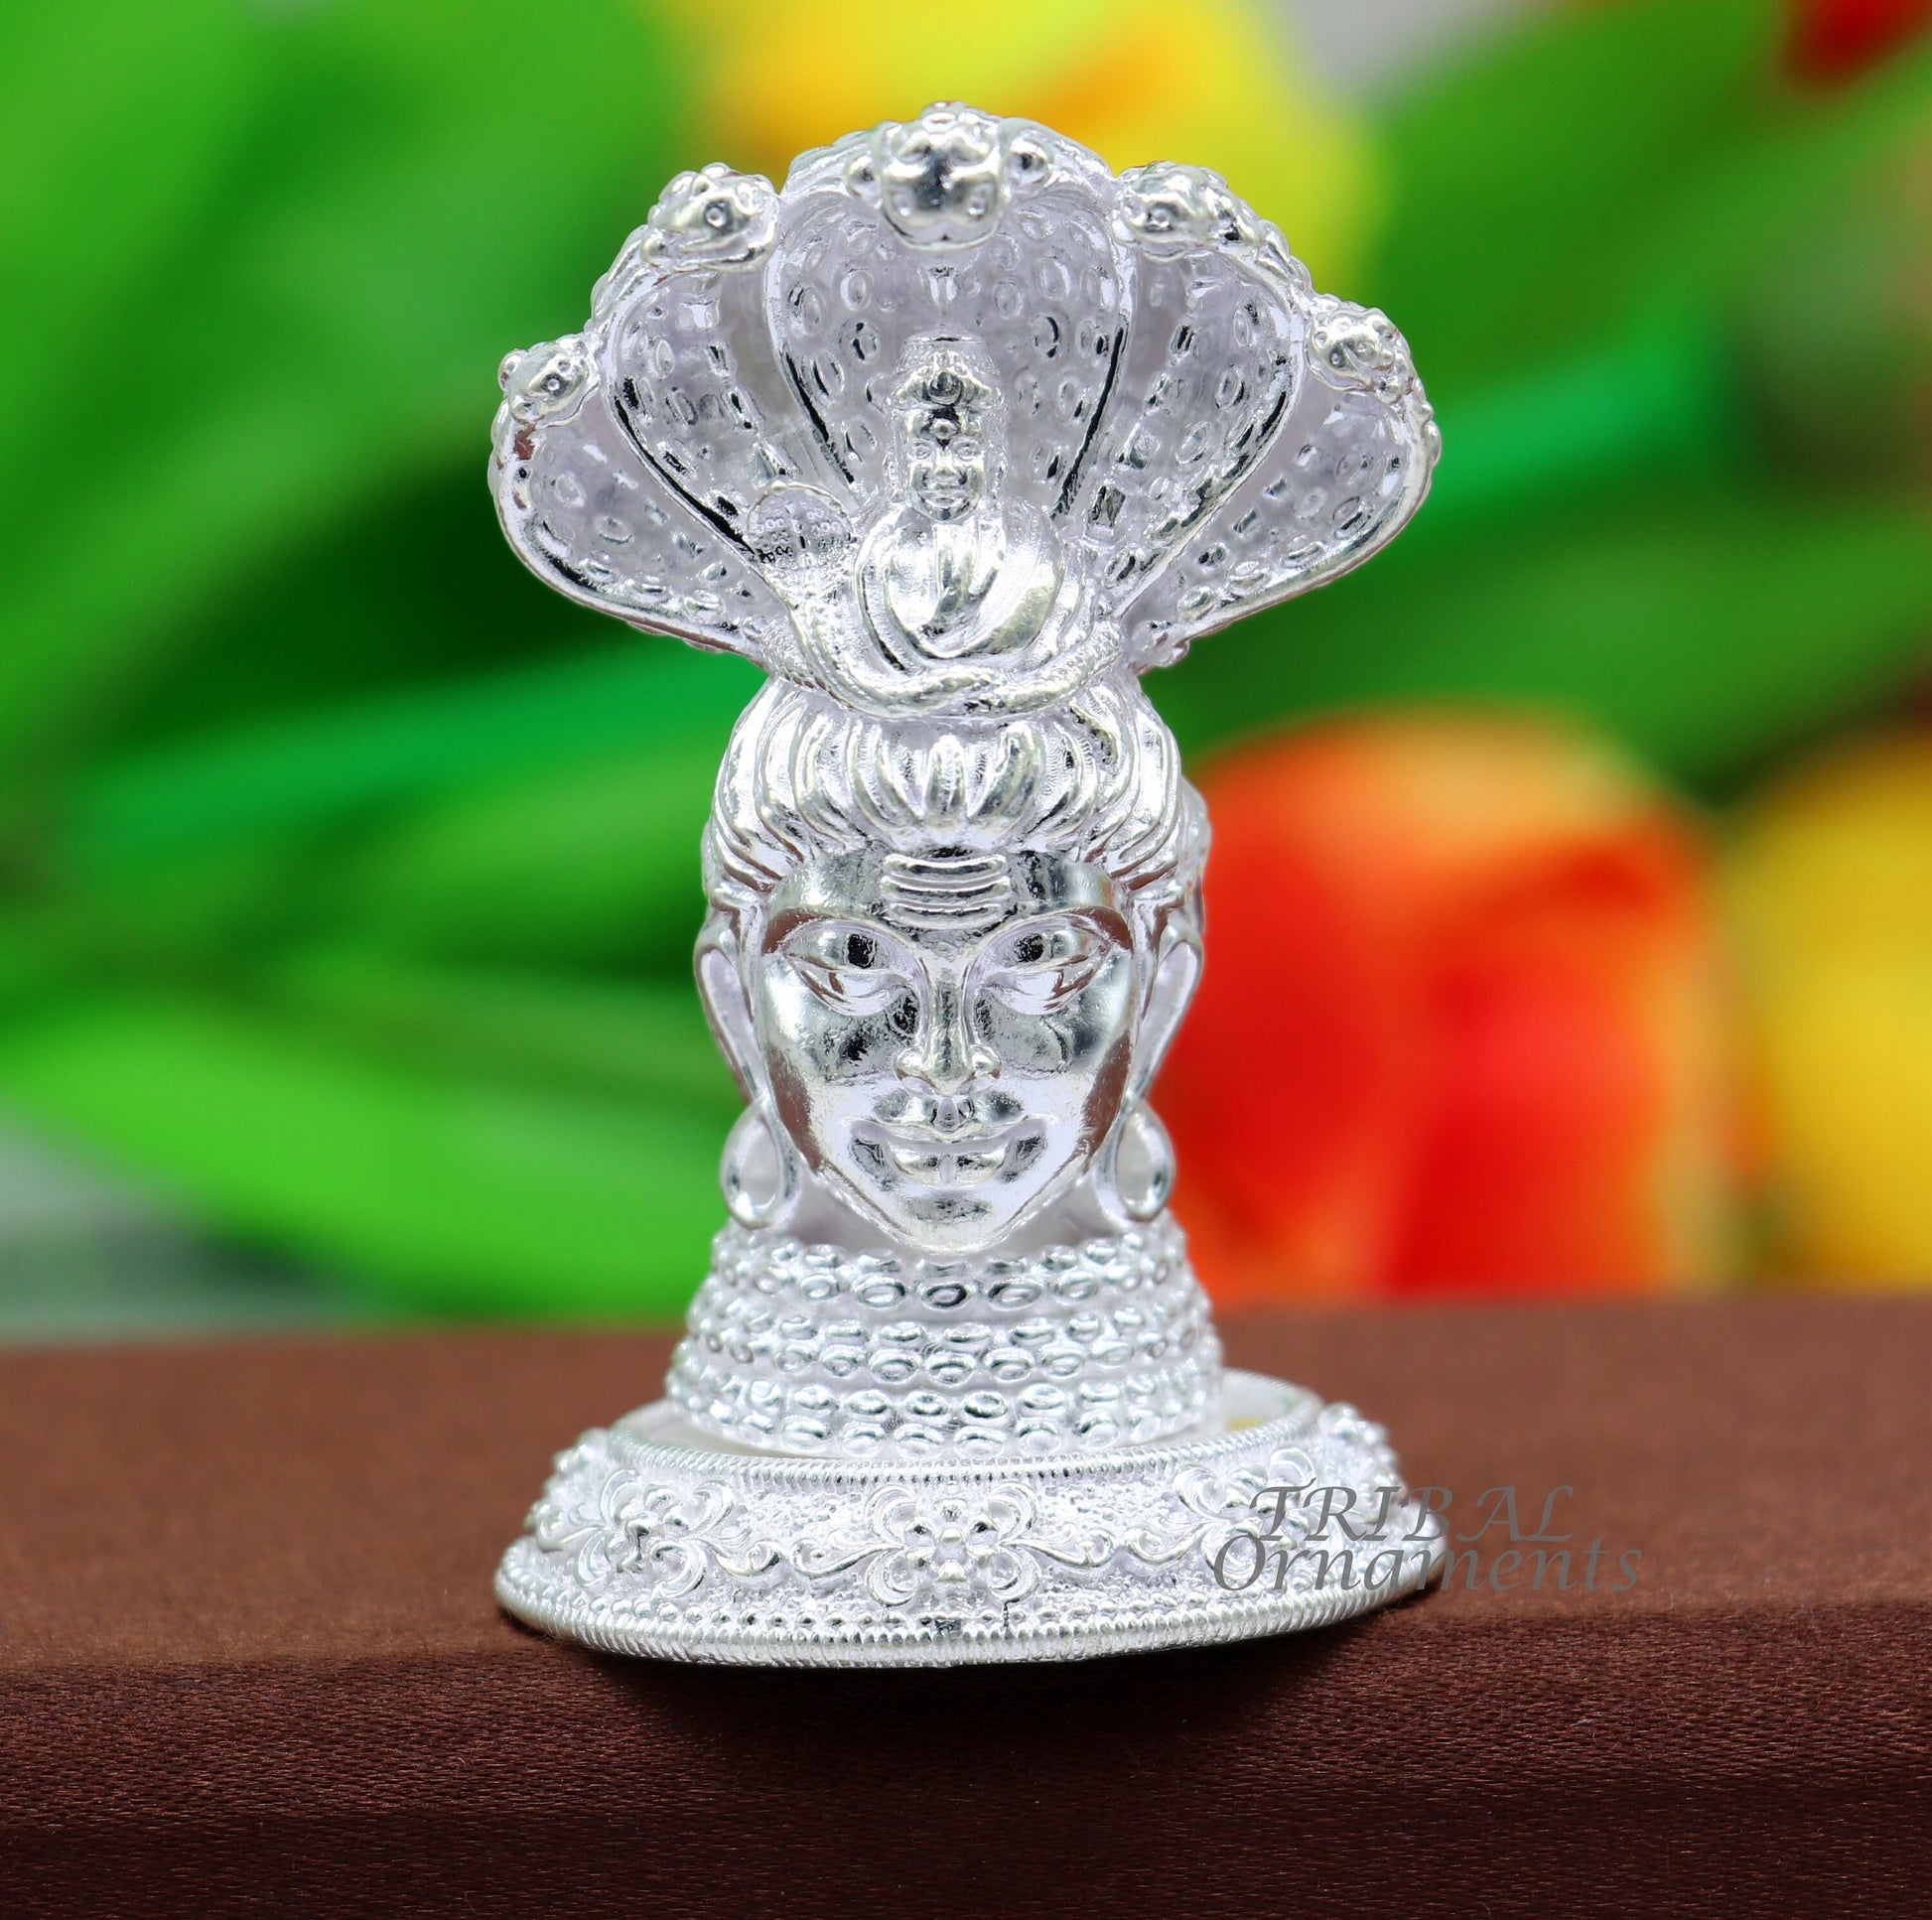 925 Sterling silver handmade hindu Lord Shiva with snake divine statue figurine, puja articles best gift silver sculpture article art600 - TRIBAL ORNAMENTS